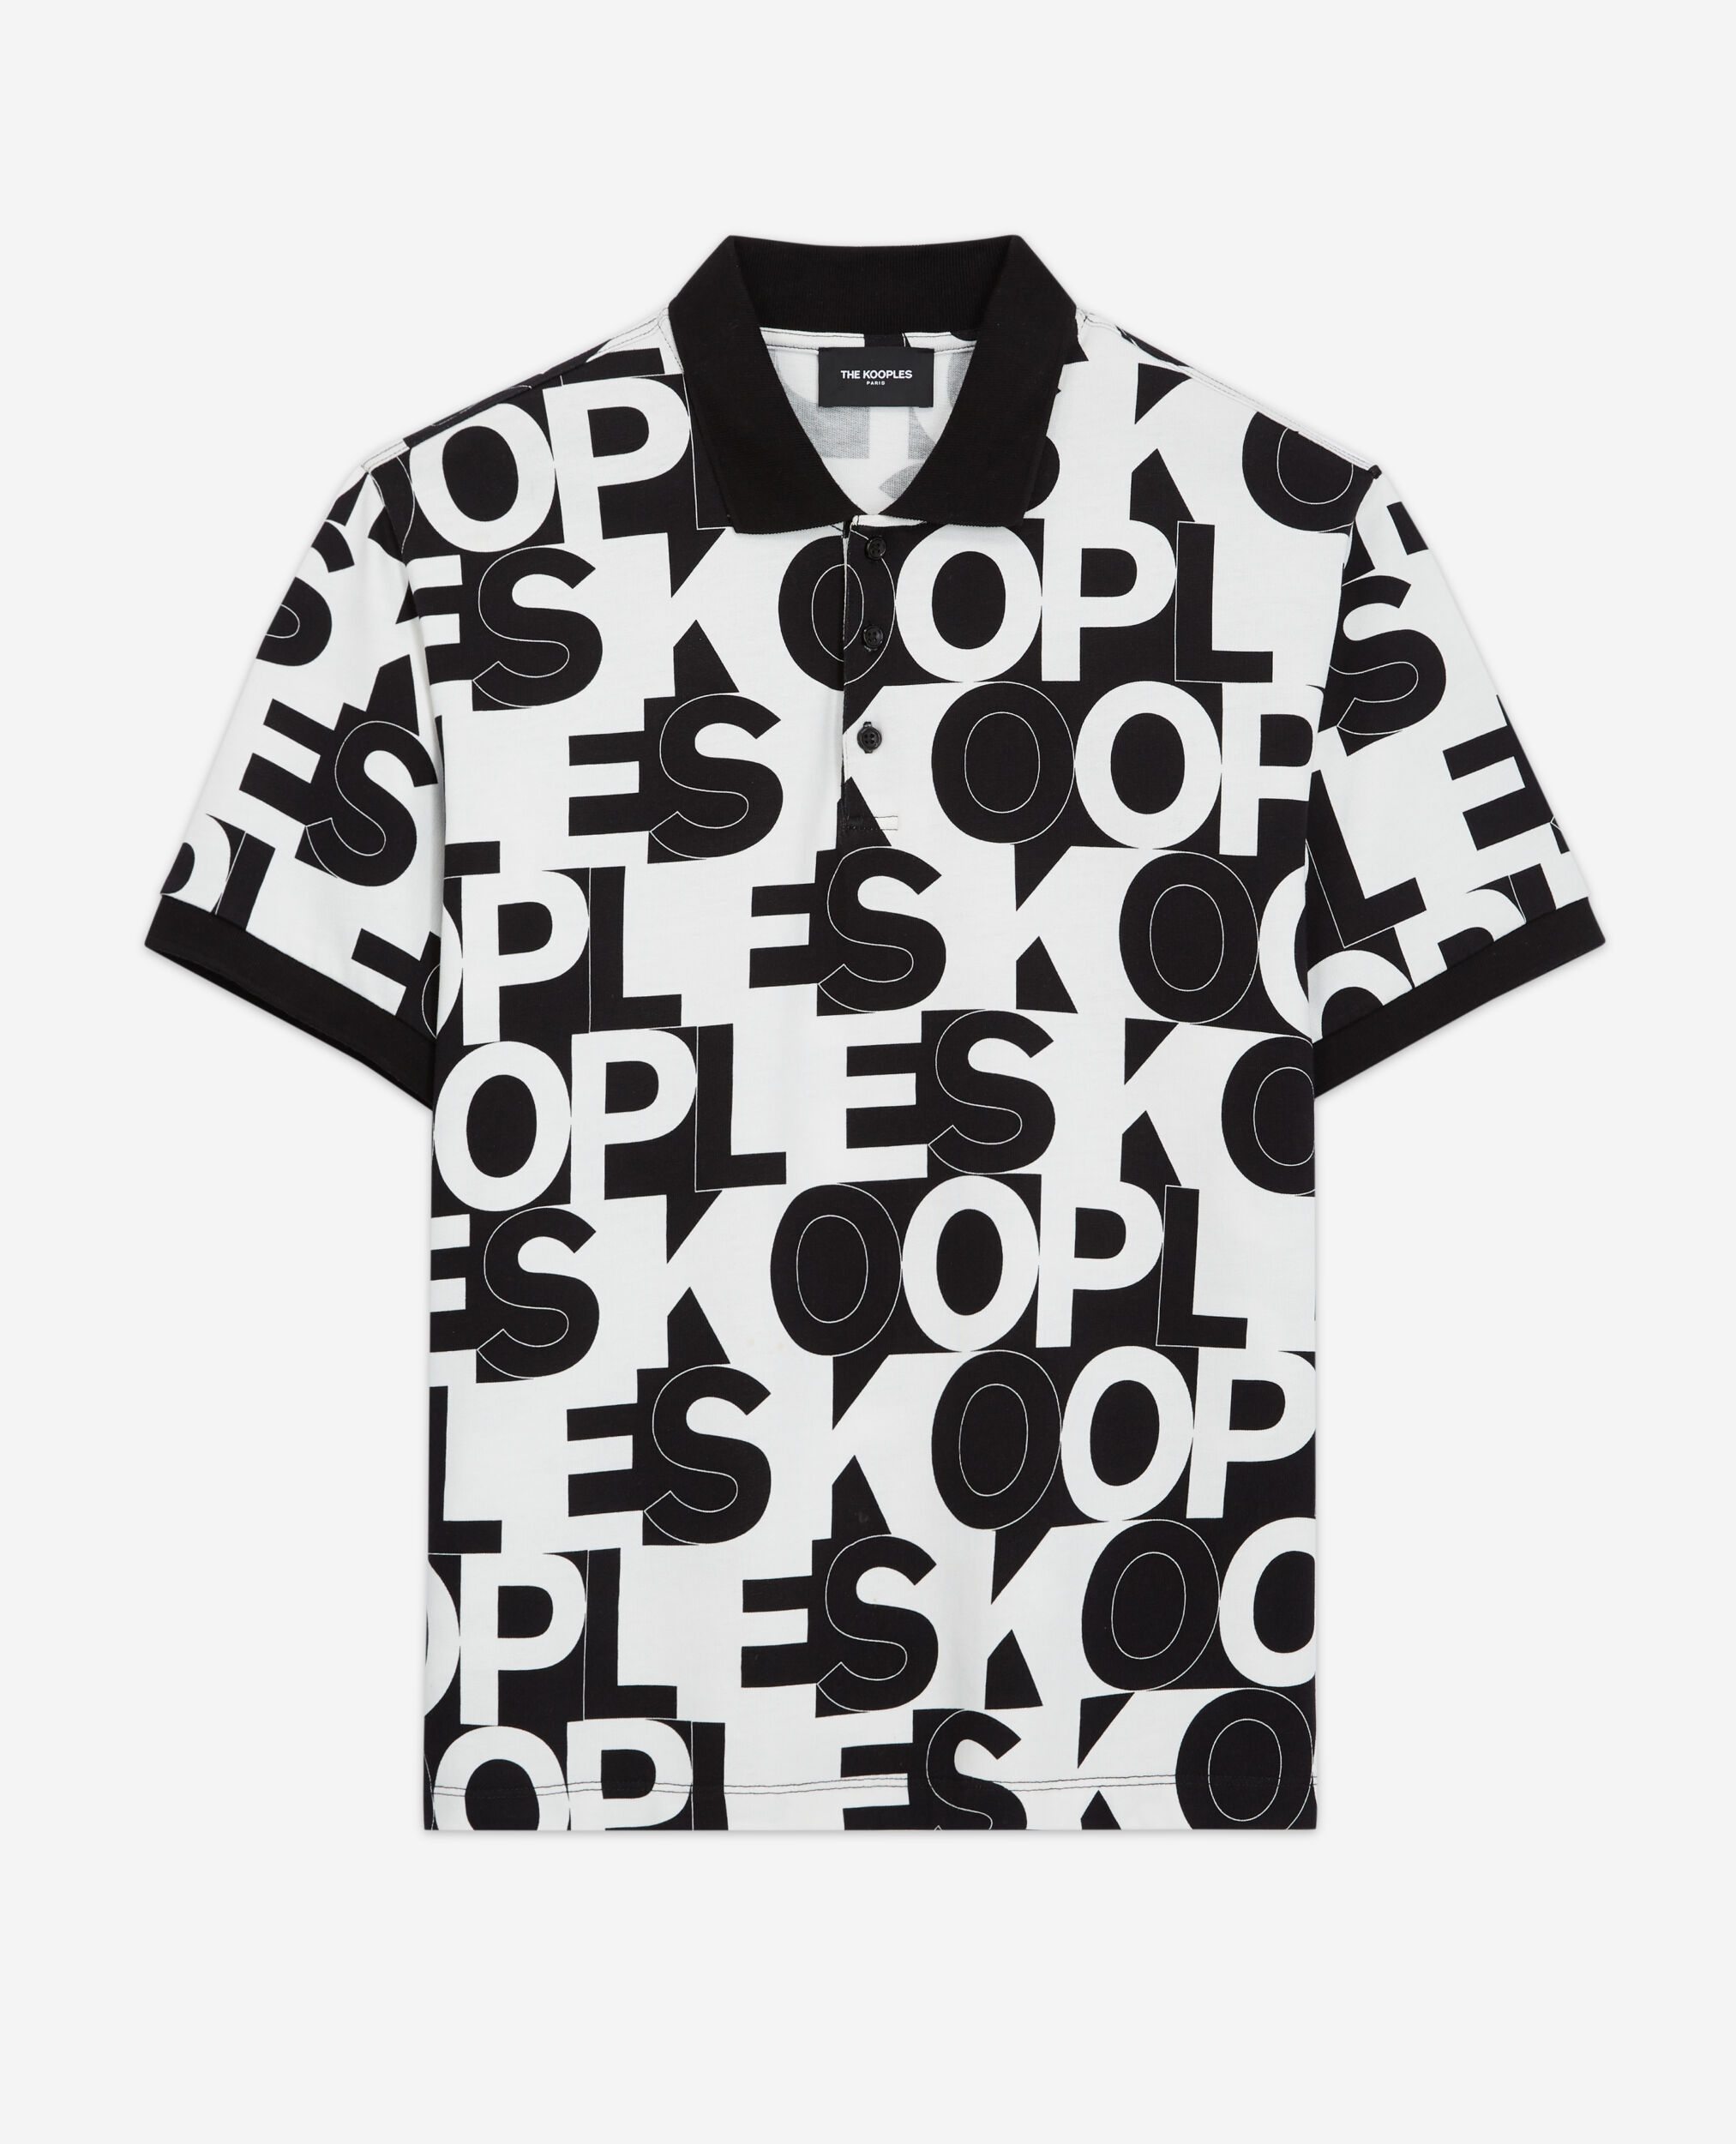 Camisa polo The Kooples, BLACK / WHITE, hi-res image number null